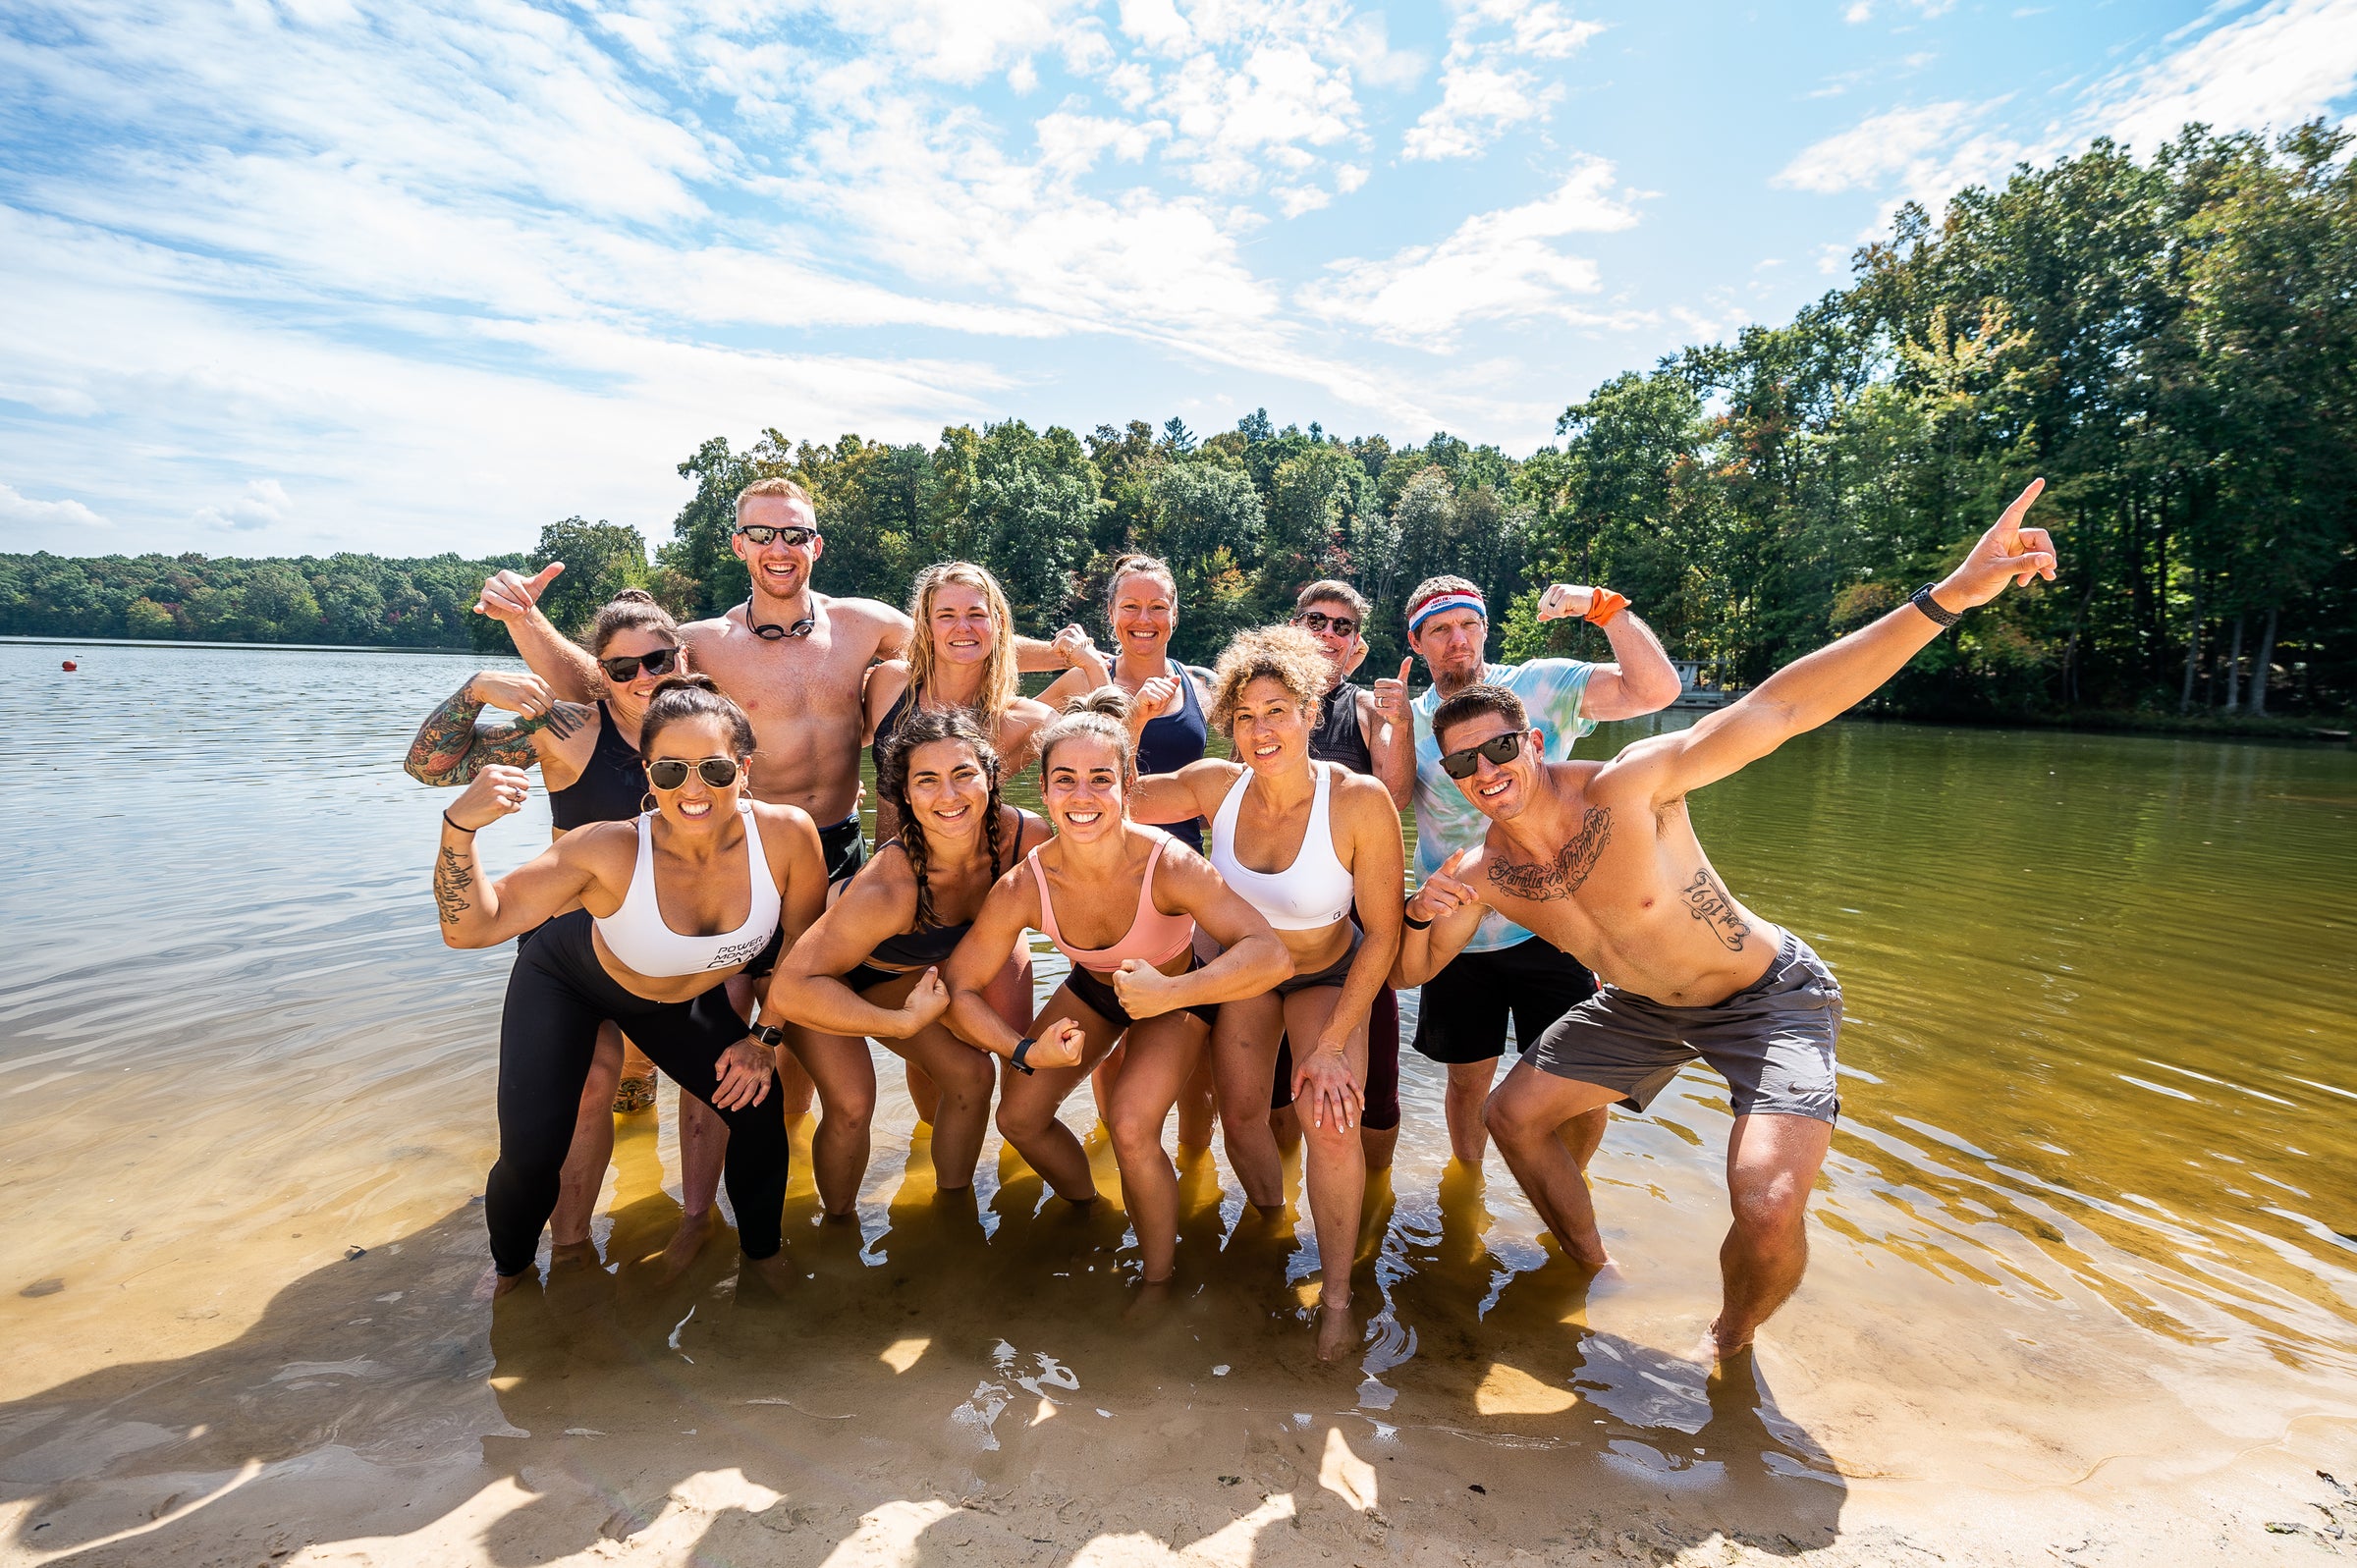 Photo of Power Monkey Campers celebrating by the lake at Power Monkey Camp.